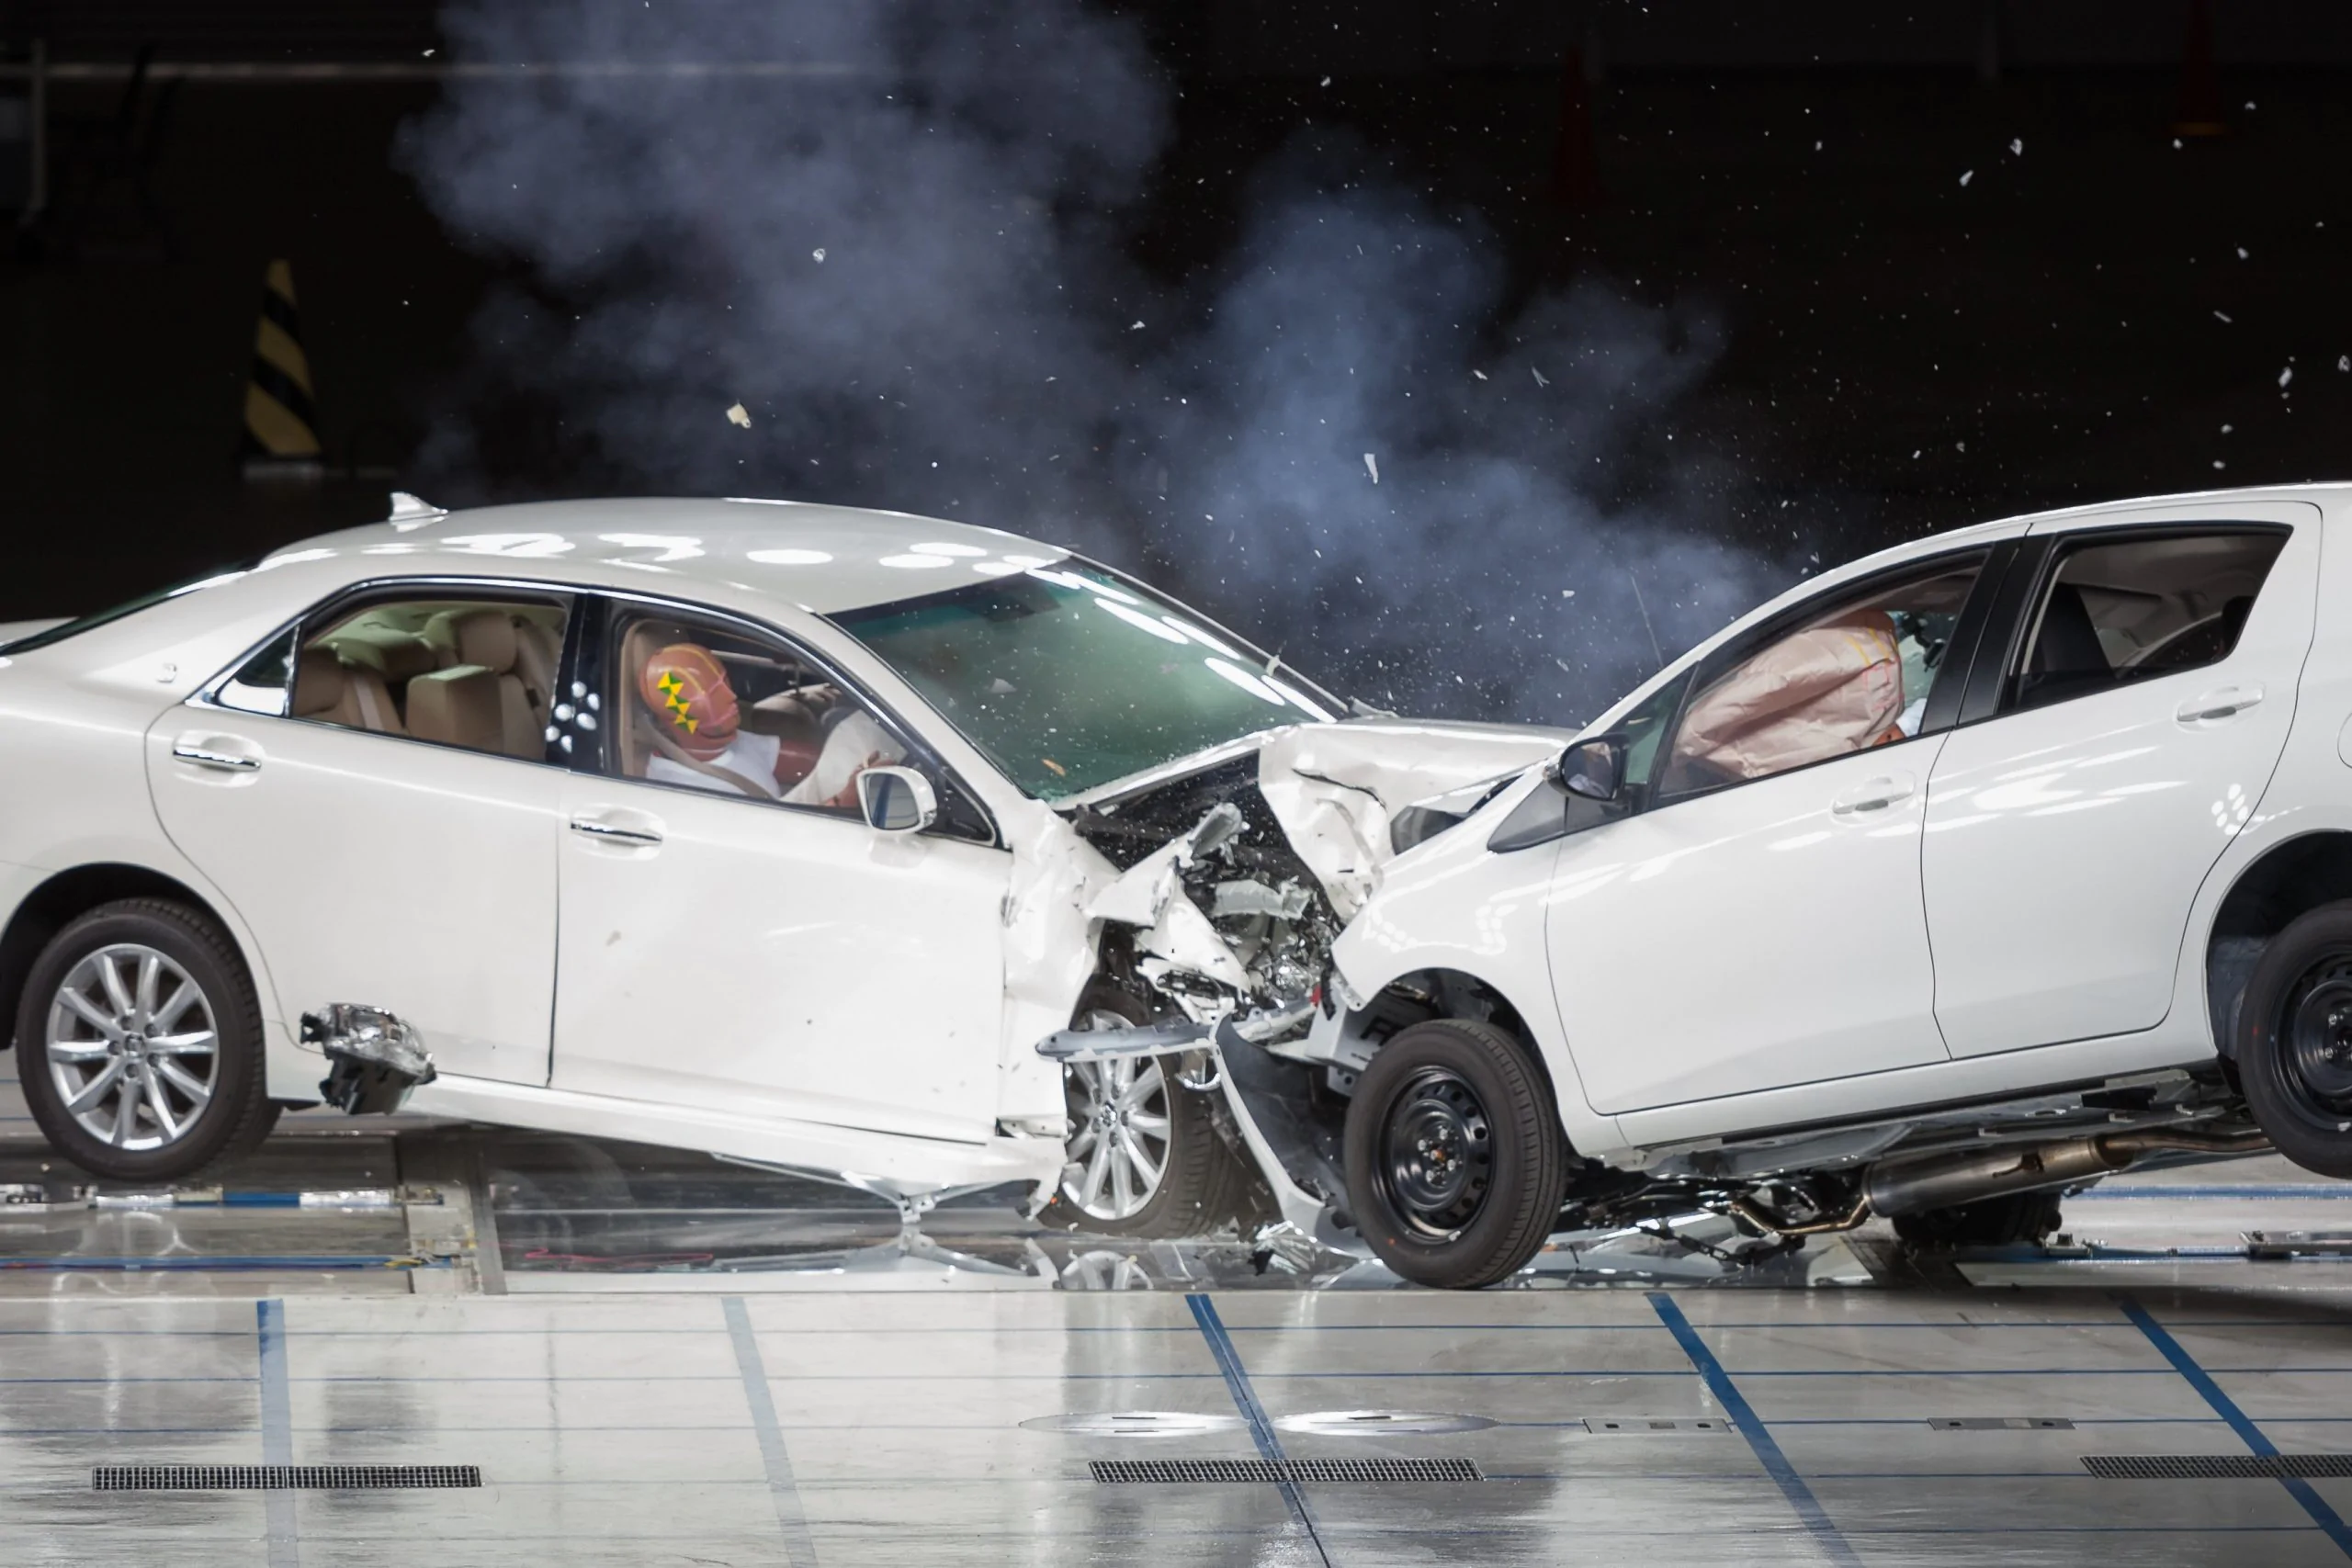 Injuries from Head-On Collisions in New York